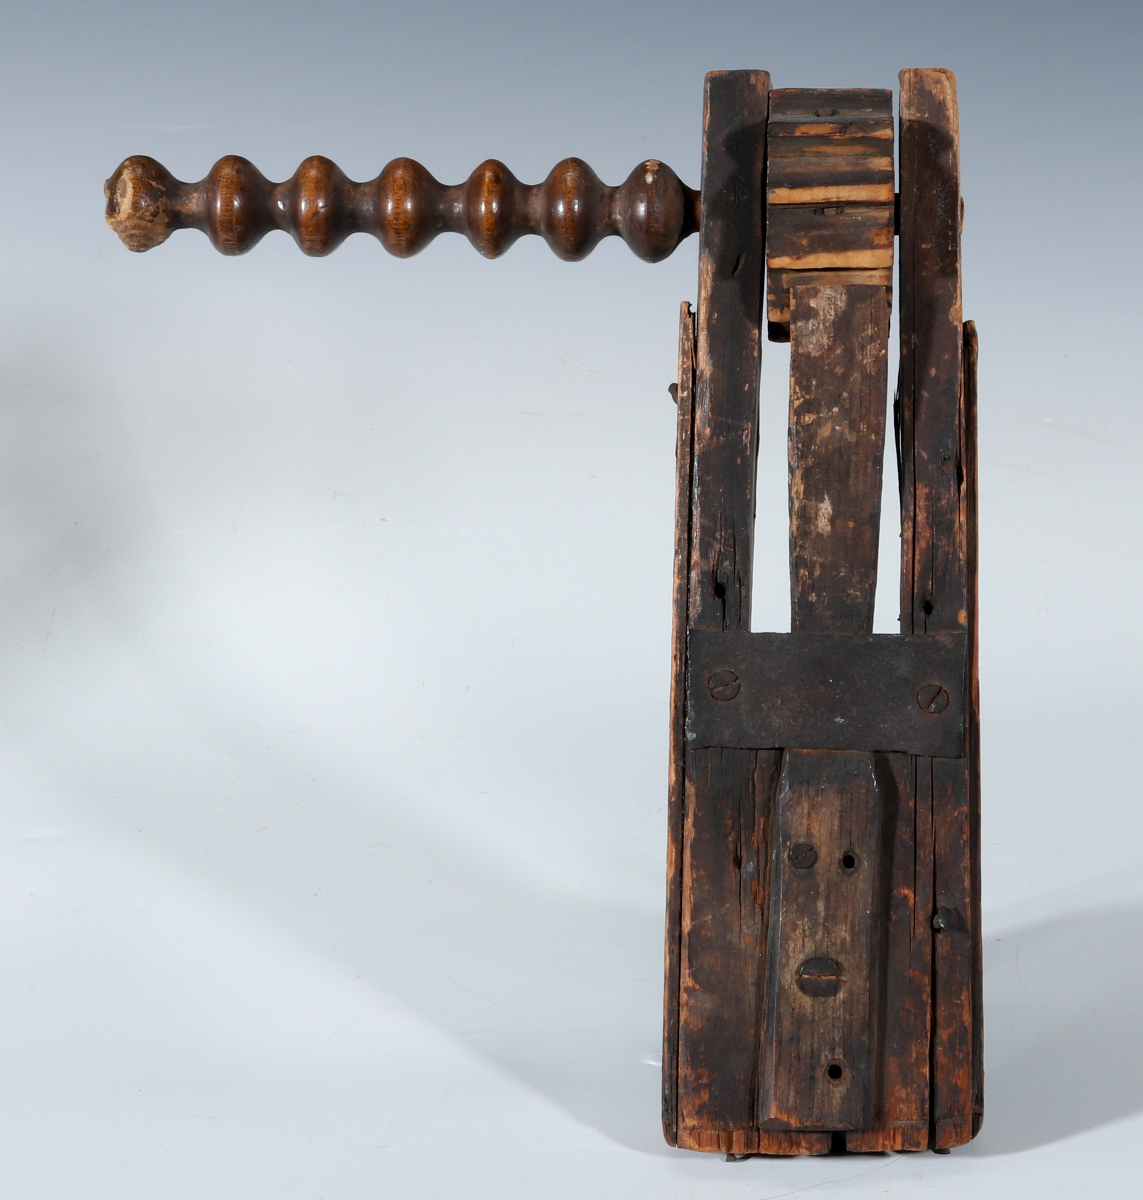 A 19TH CENTURY WOOD FIRE WATCHMAN RATTLE ALARM